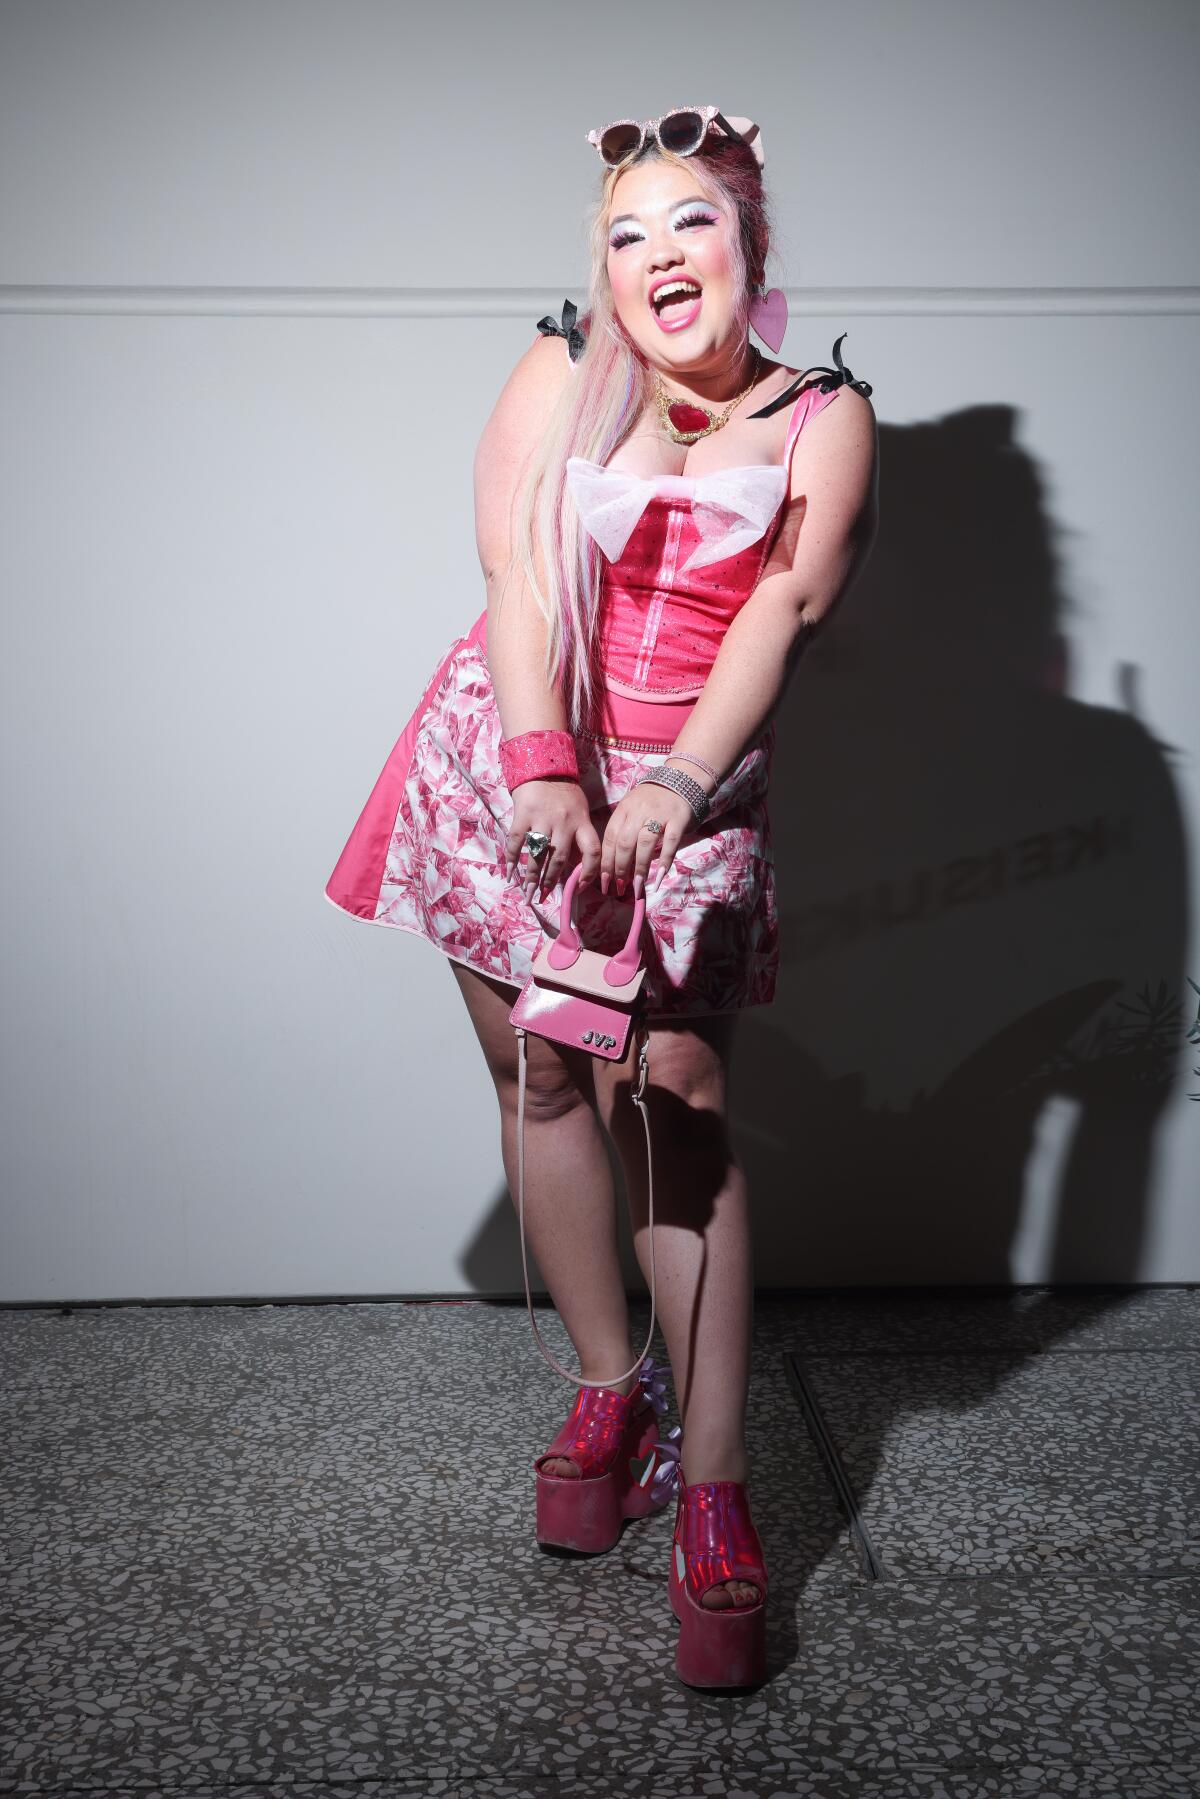  Jasmine Vaughn Perrett, 27, poses in a pink dress and platform pink shoes and pink purse.